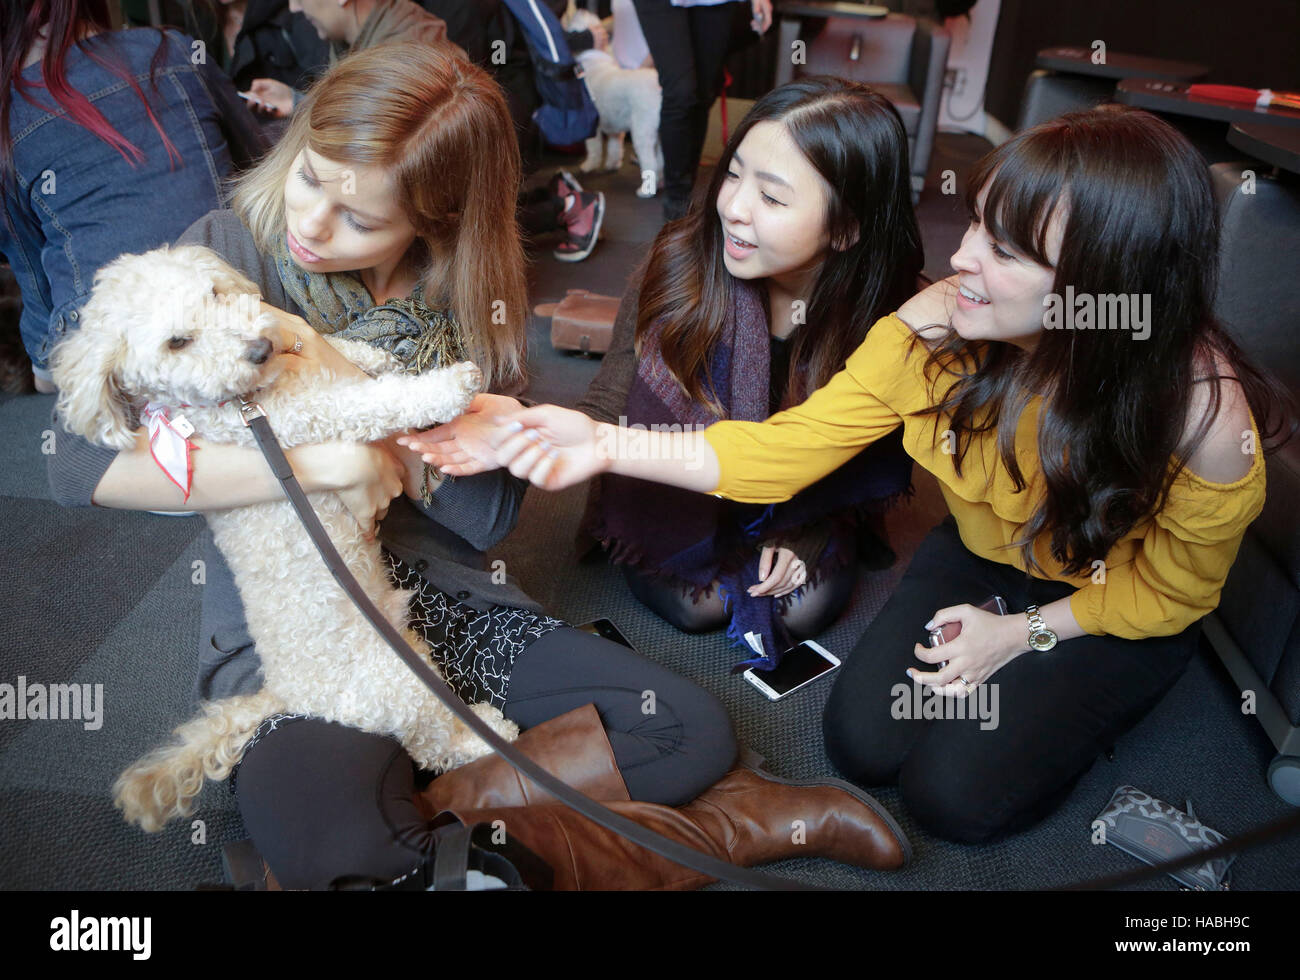 Vancouver, Canada. 29th Nov, 2016. Students play with a dog during the puppy therapy event at Simon Fraser University in Vancouver, Canada, Nov. 29, 2016. Simon Fraser University invited puppies to campus during exam time to help students take a break from the stress of end-of-term assignments. © Liang Sen/Xinhua/Alamy Live News Stock Photo